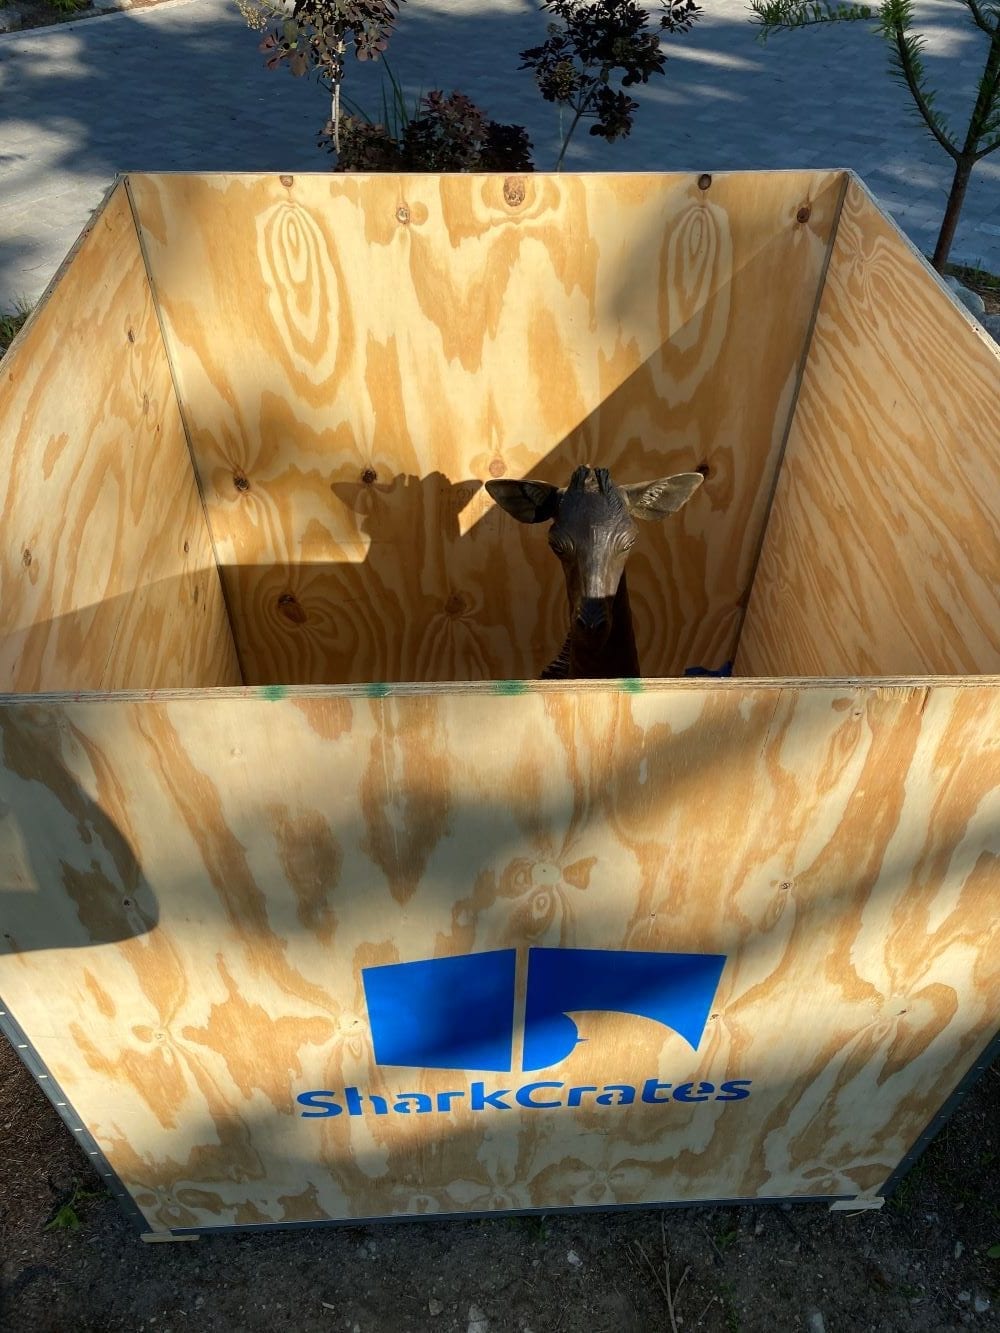 Giraffe poking its head out of the SharkCrate